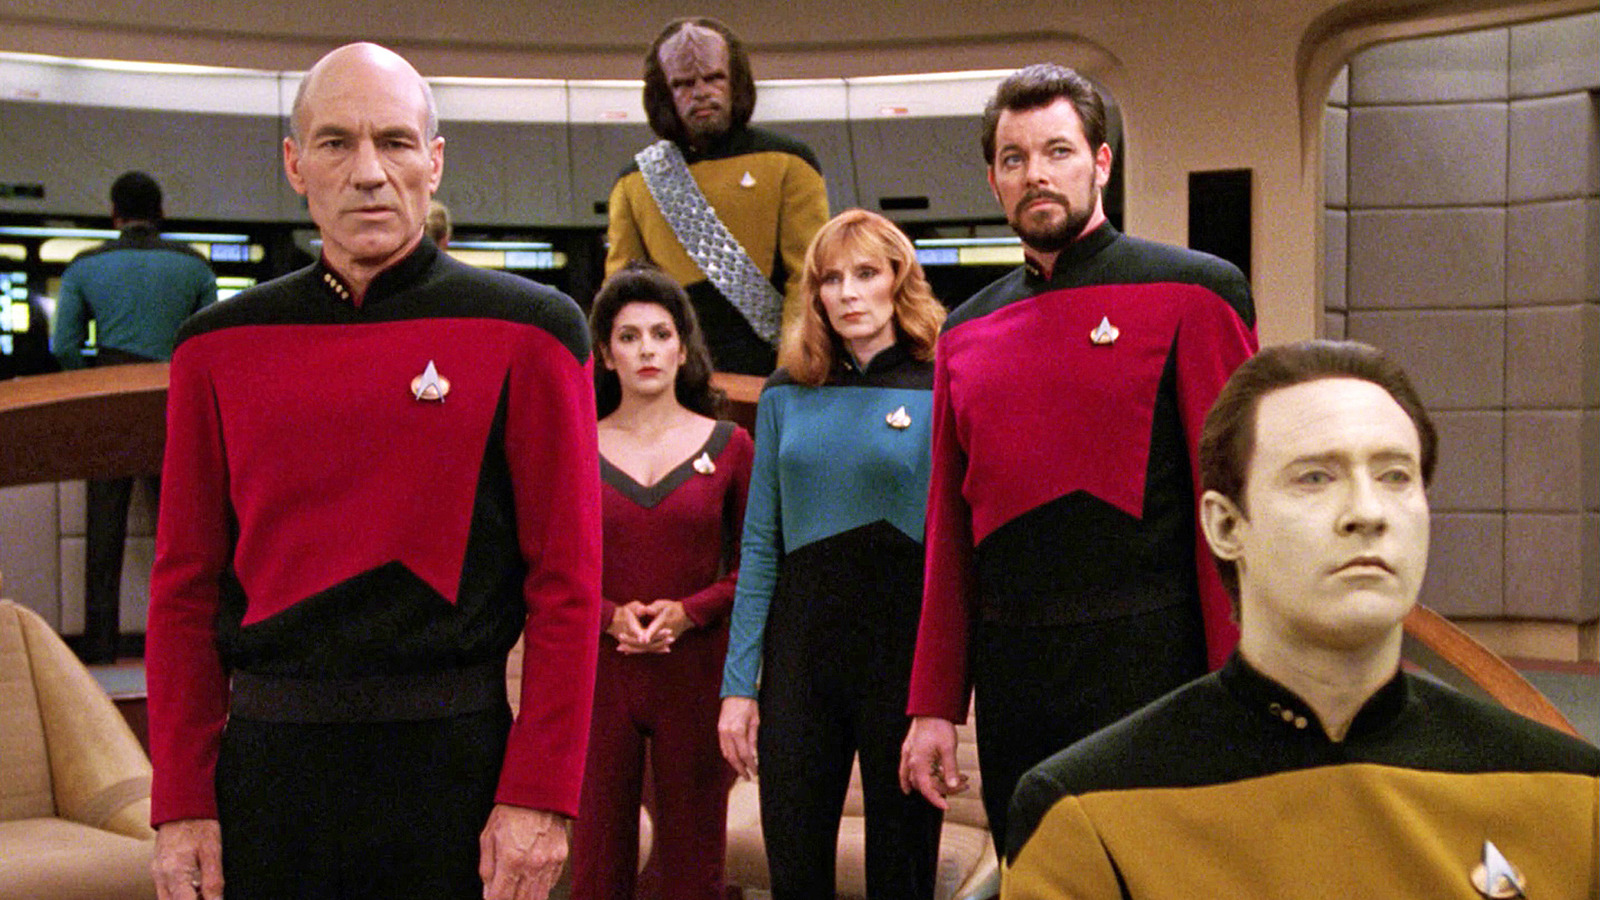 Why 'Star Trek: The Next Generation's' Banned Episode Still Sparks Debate About Political Drama on TV